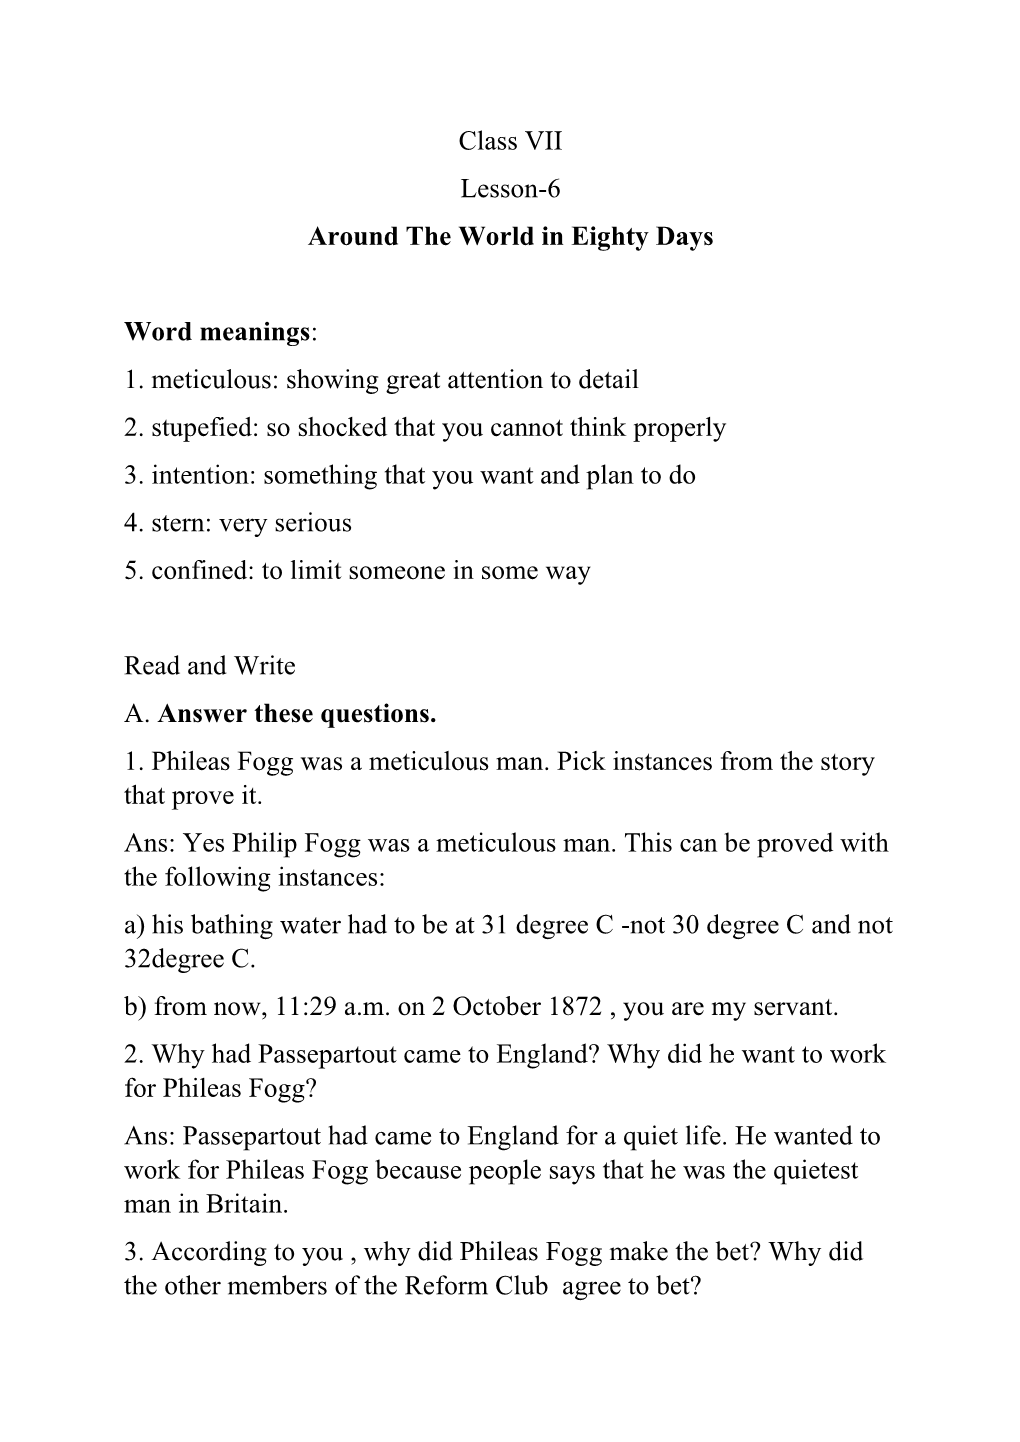 Class VII Lesson-6 Around the World in Eighty Days Word Meanings